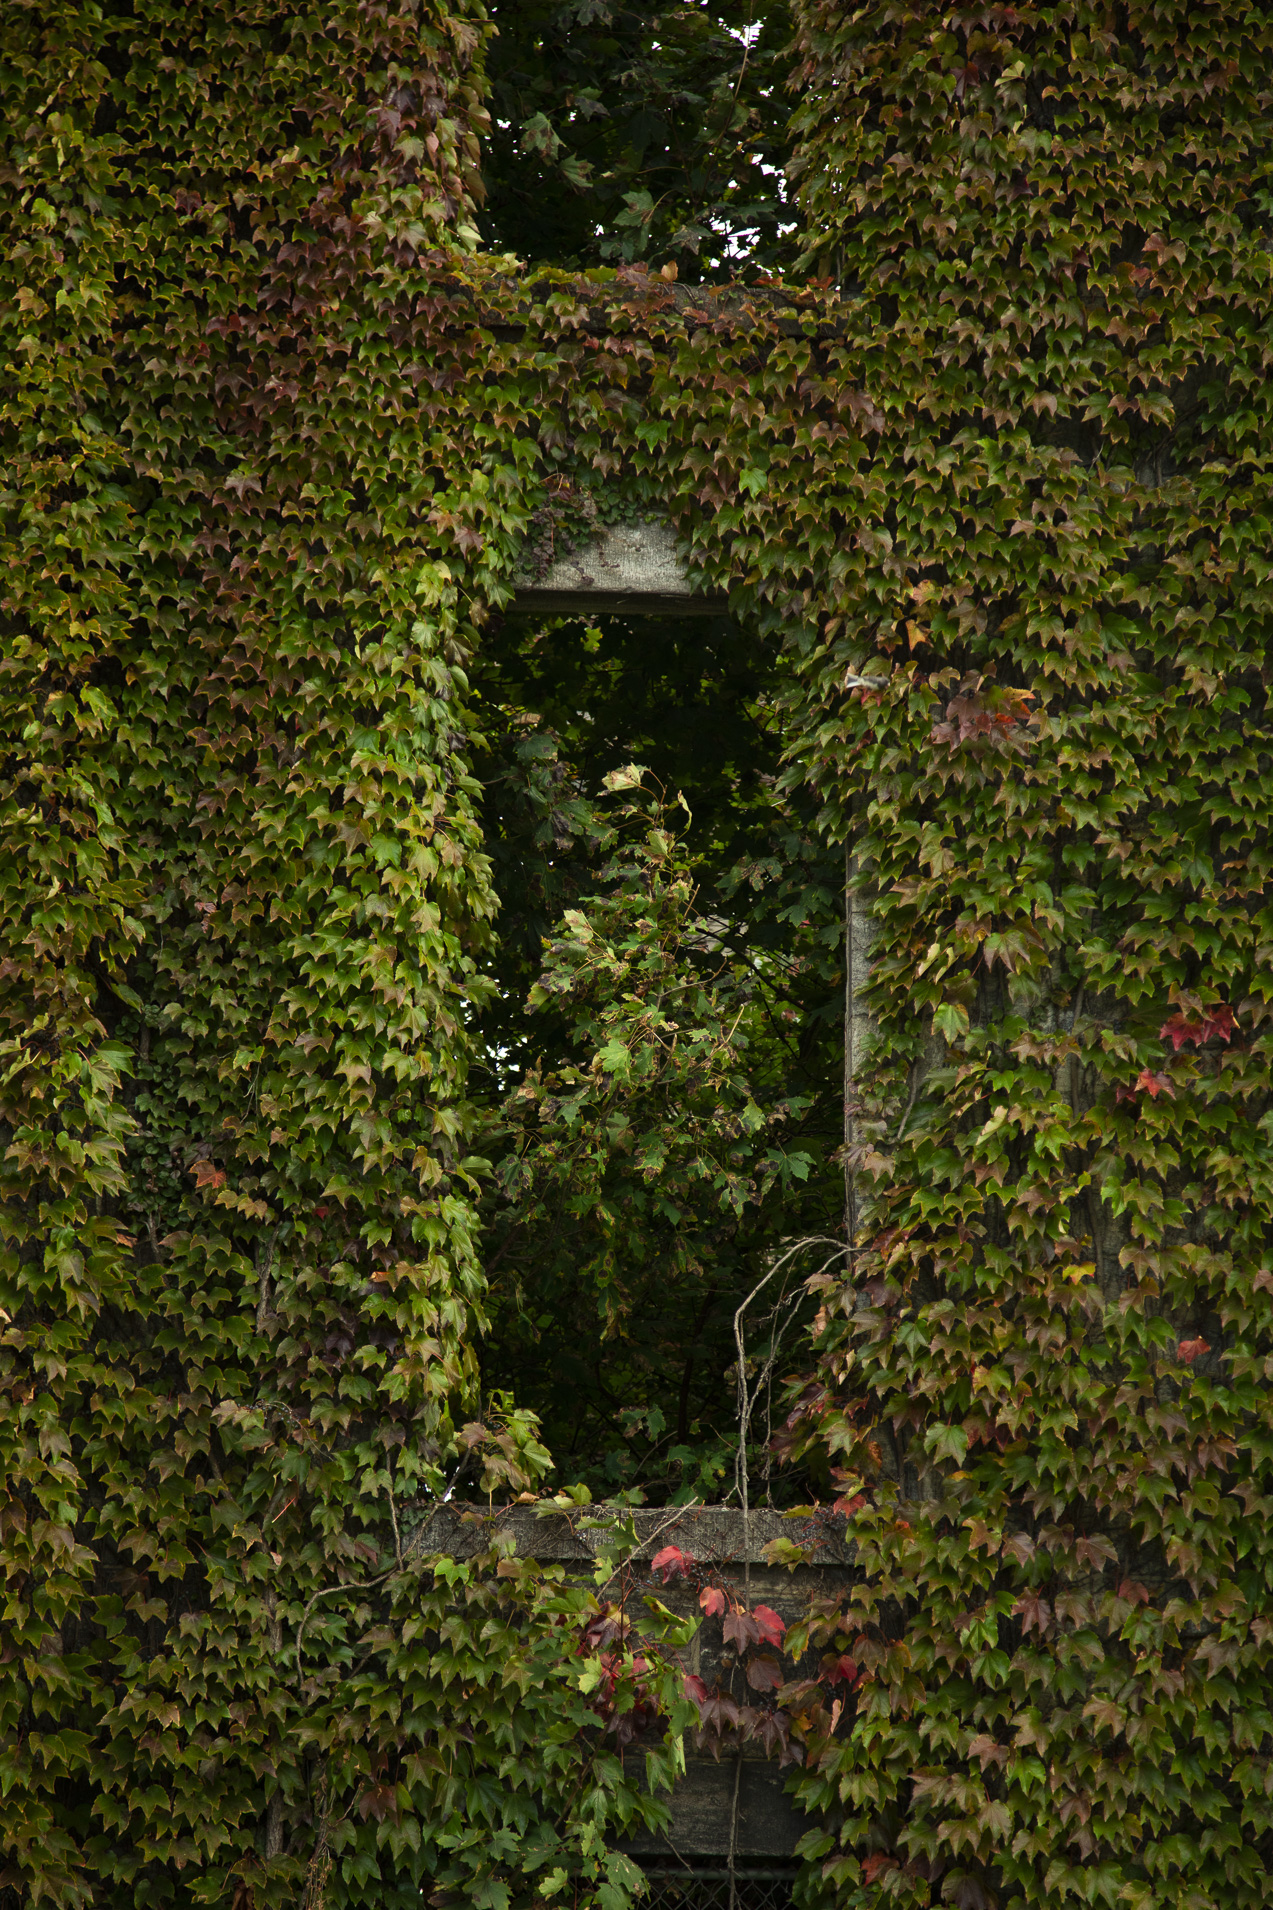 An architectural detail showing two glassless window and an architectural surface which has been entirely covered by a living plant that appears to be some sort of ivy